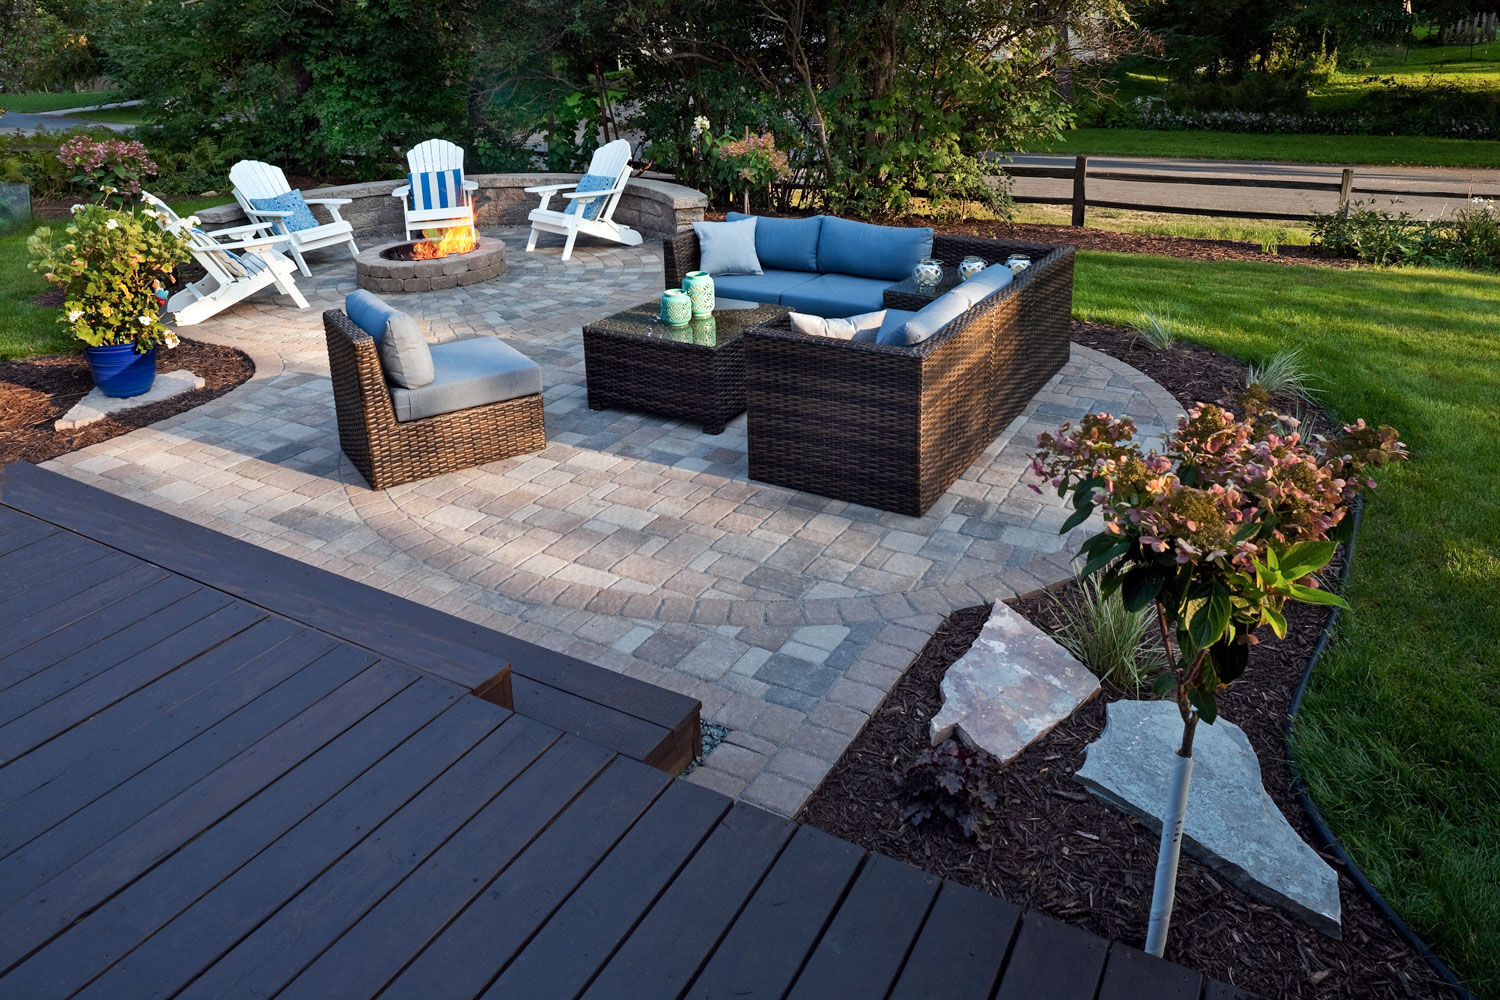 Villa Landscapes can help you create a beautiful, maintenance-free paver patio